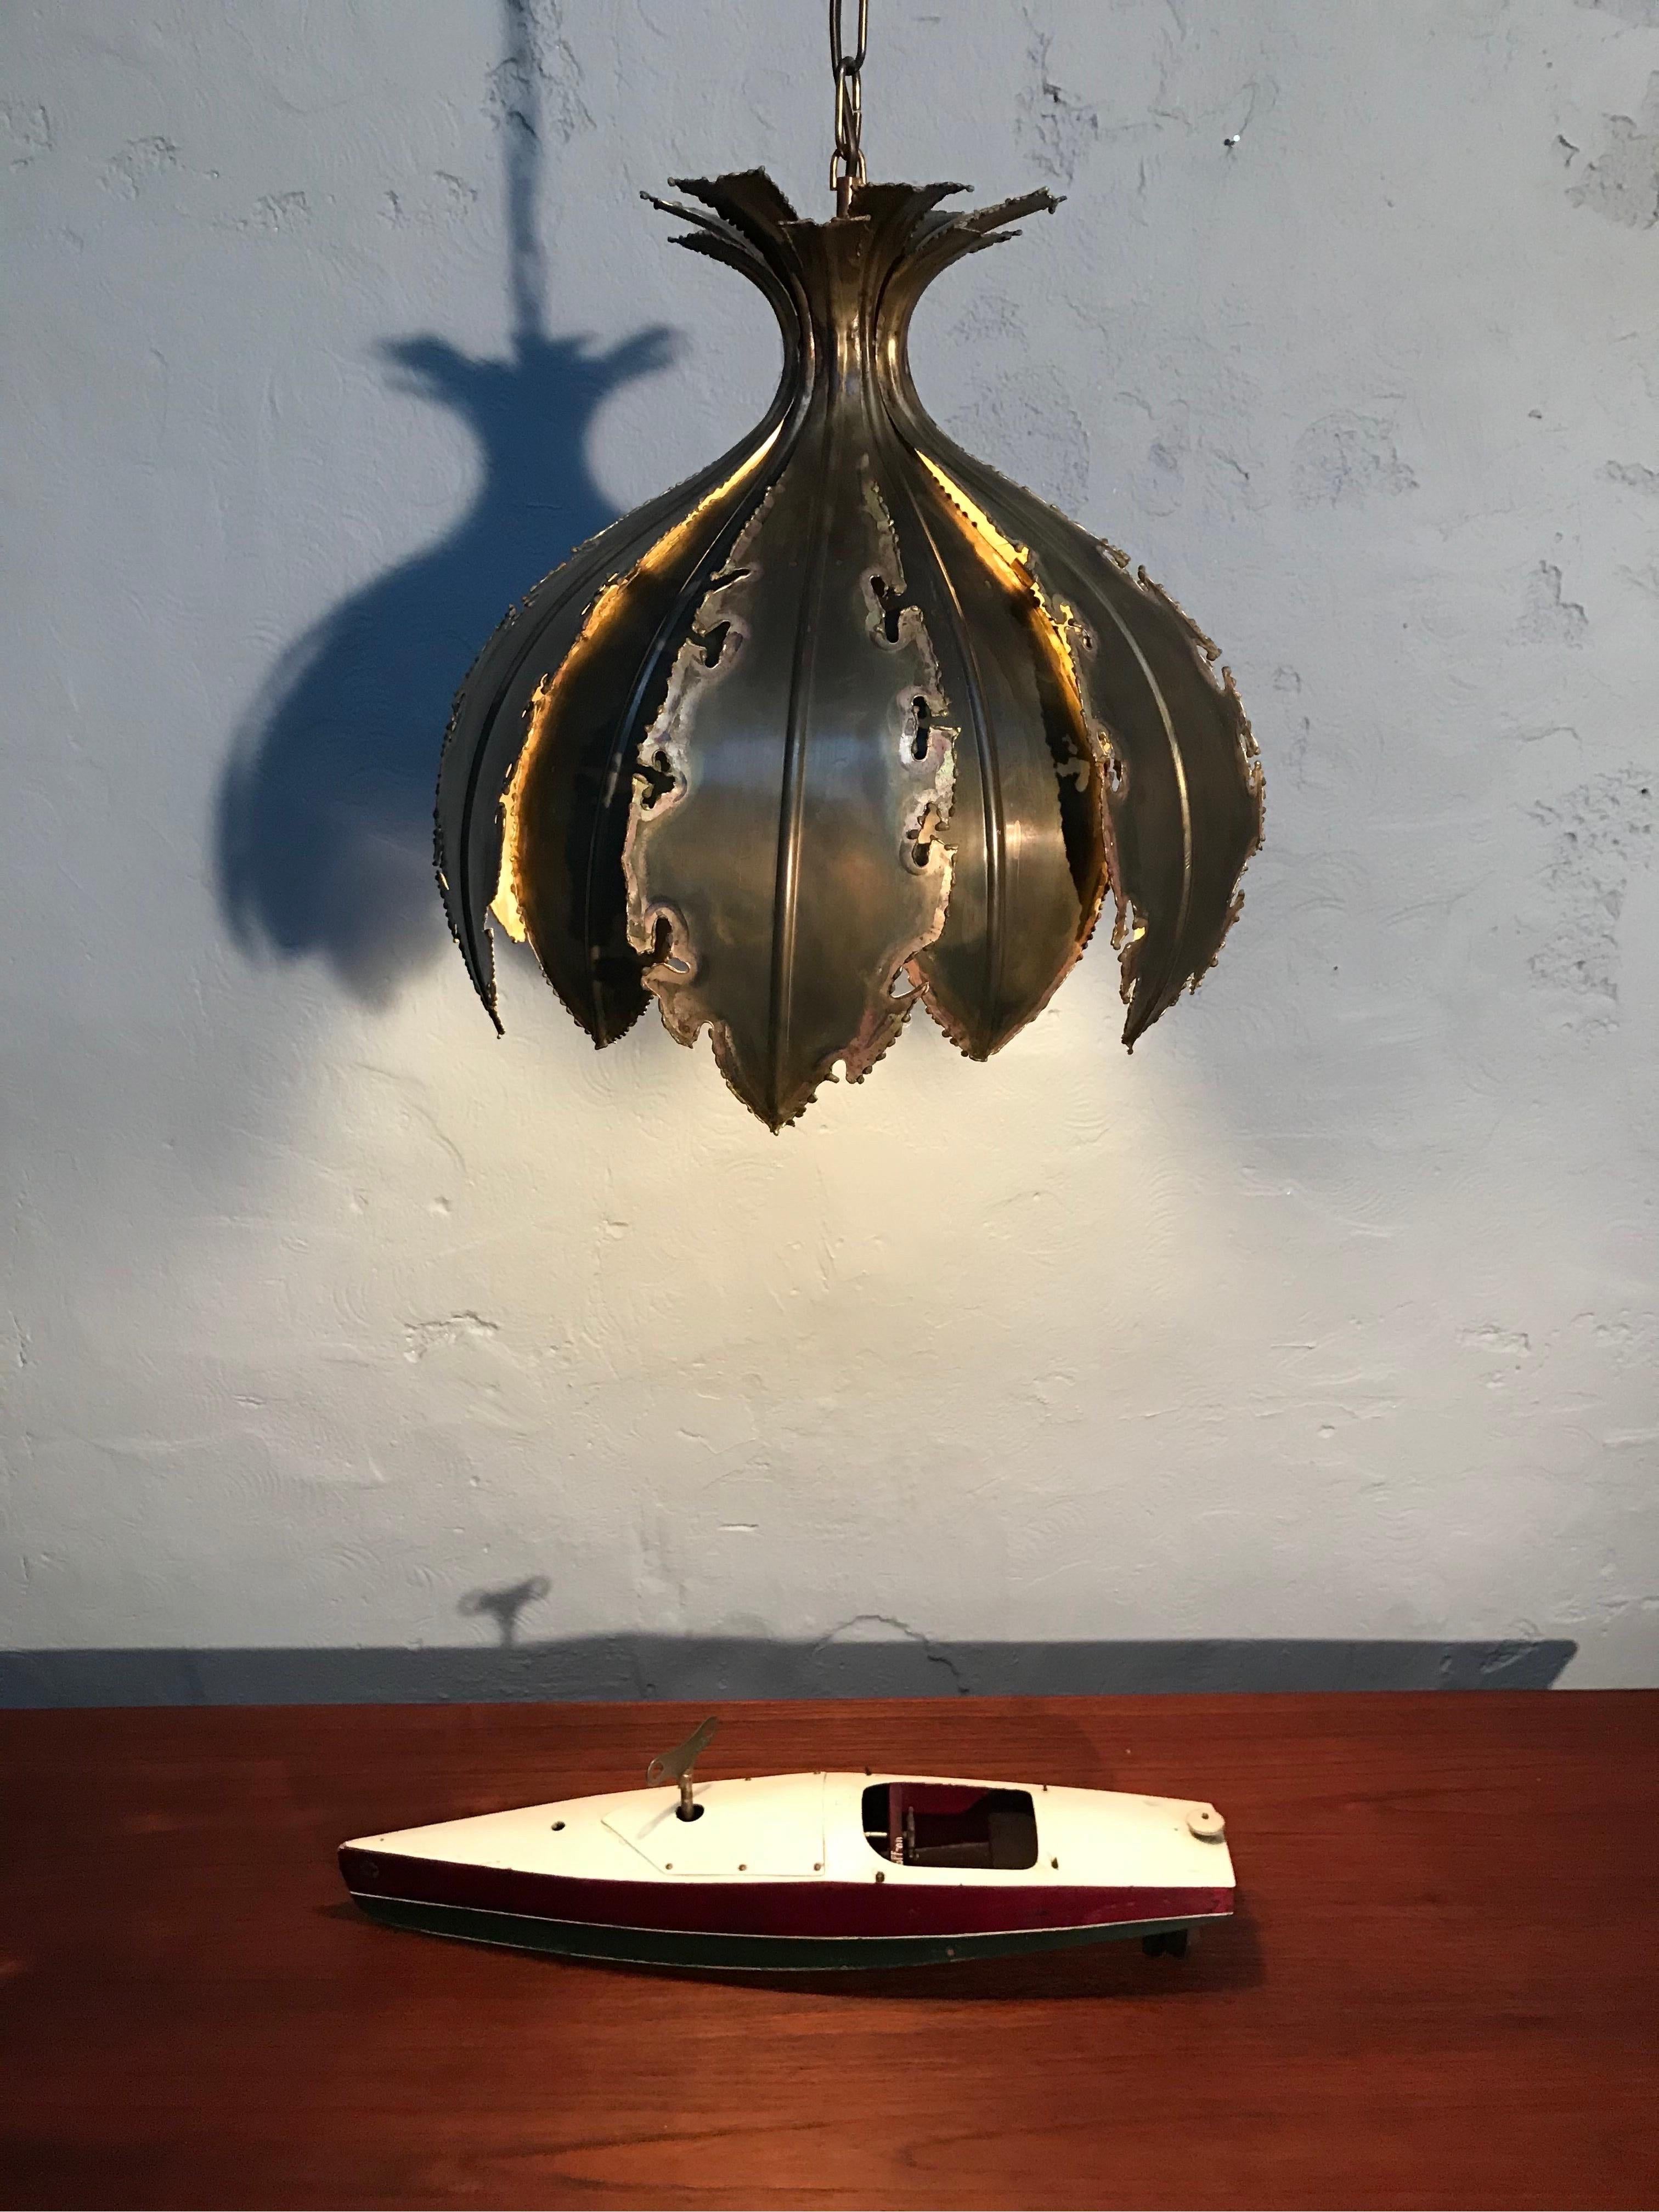 Vintage Svend Aage Holm Sørensen for Holm Sørensen & Co pendent chandelier lamp model 6395.
Known as the onion this classic piece of brutalist lighting is made up of two layers of torch cut brass.
The Danish designer Svend Aage Holm-Sørensen